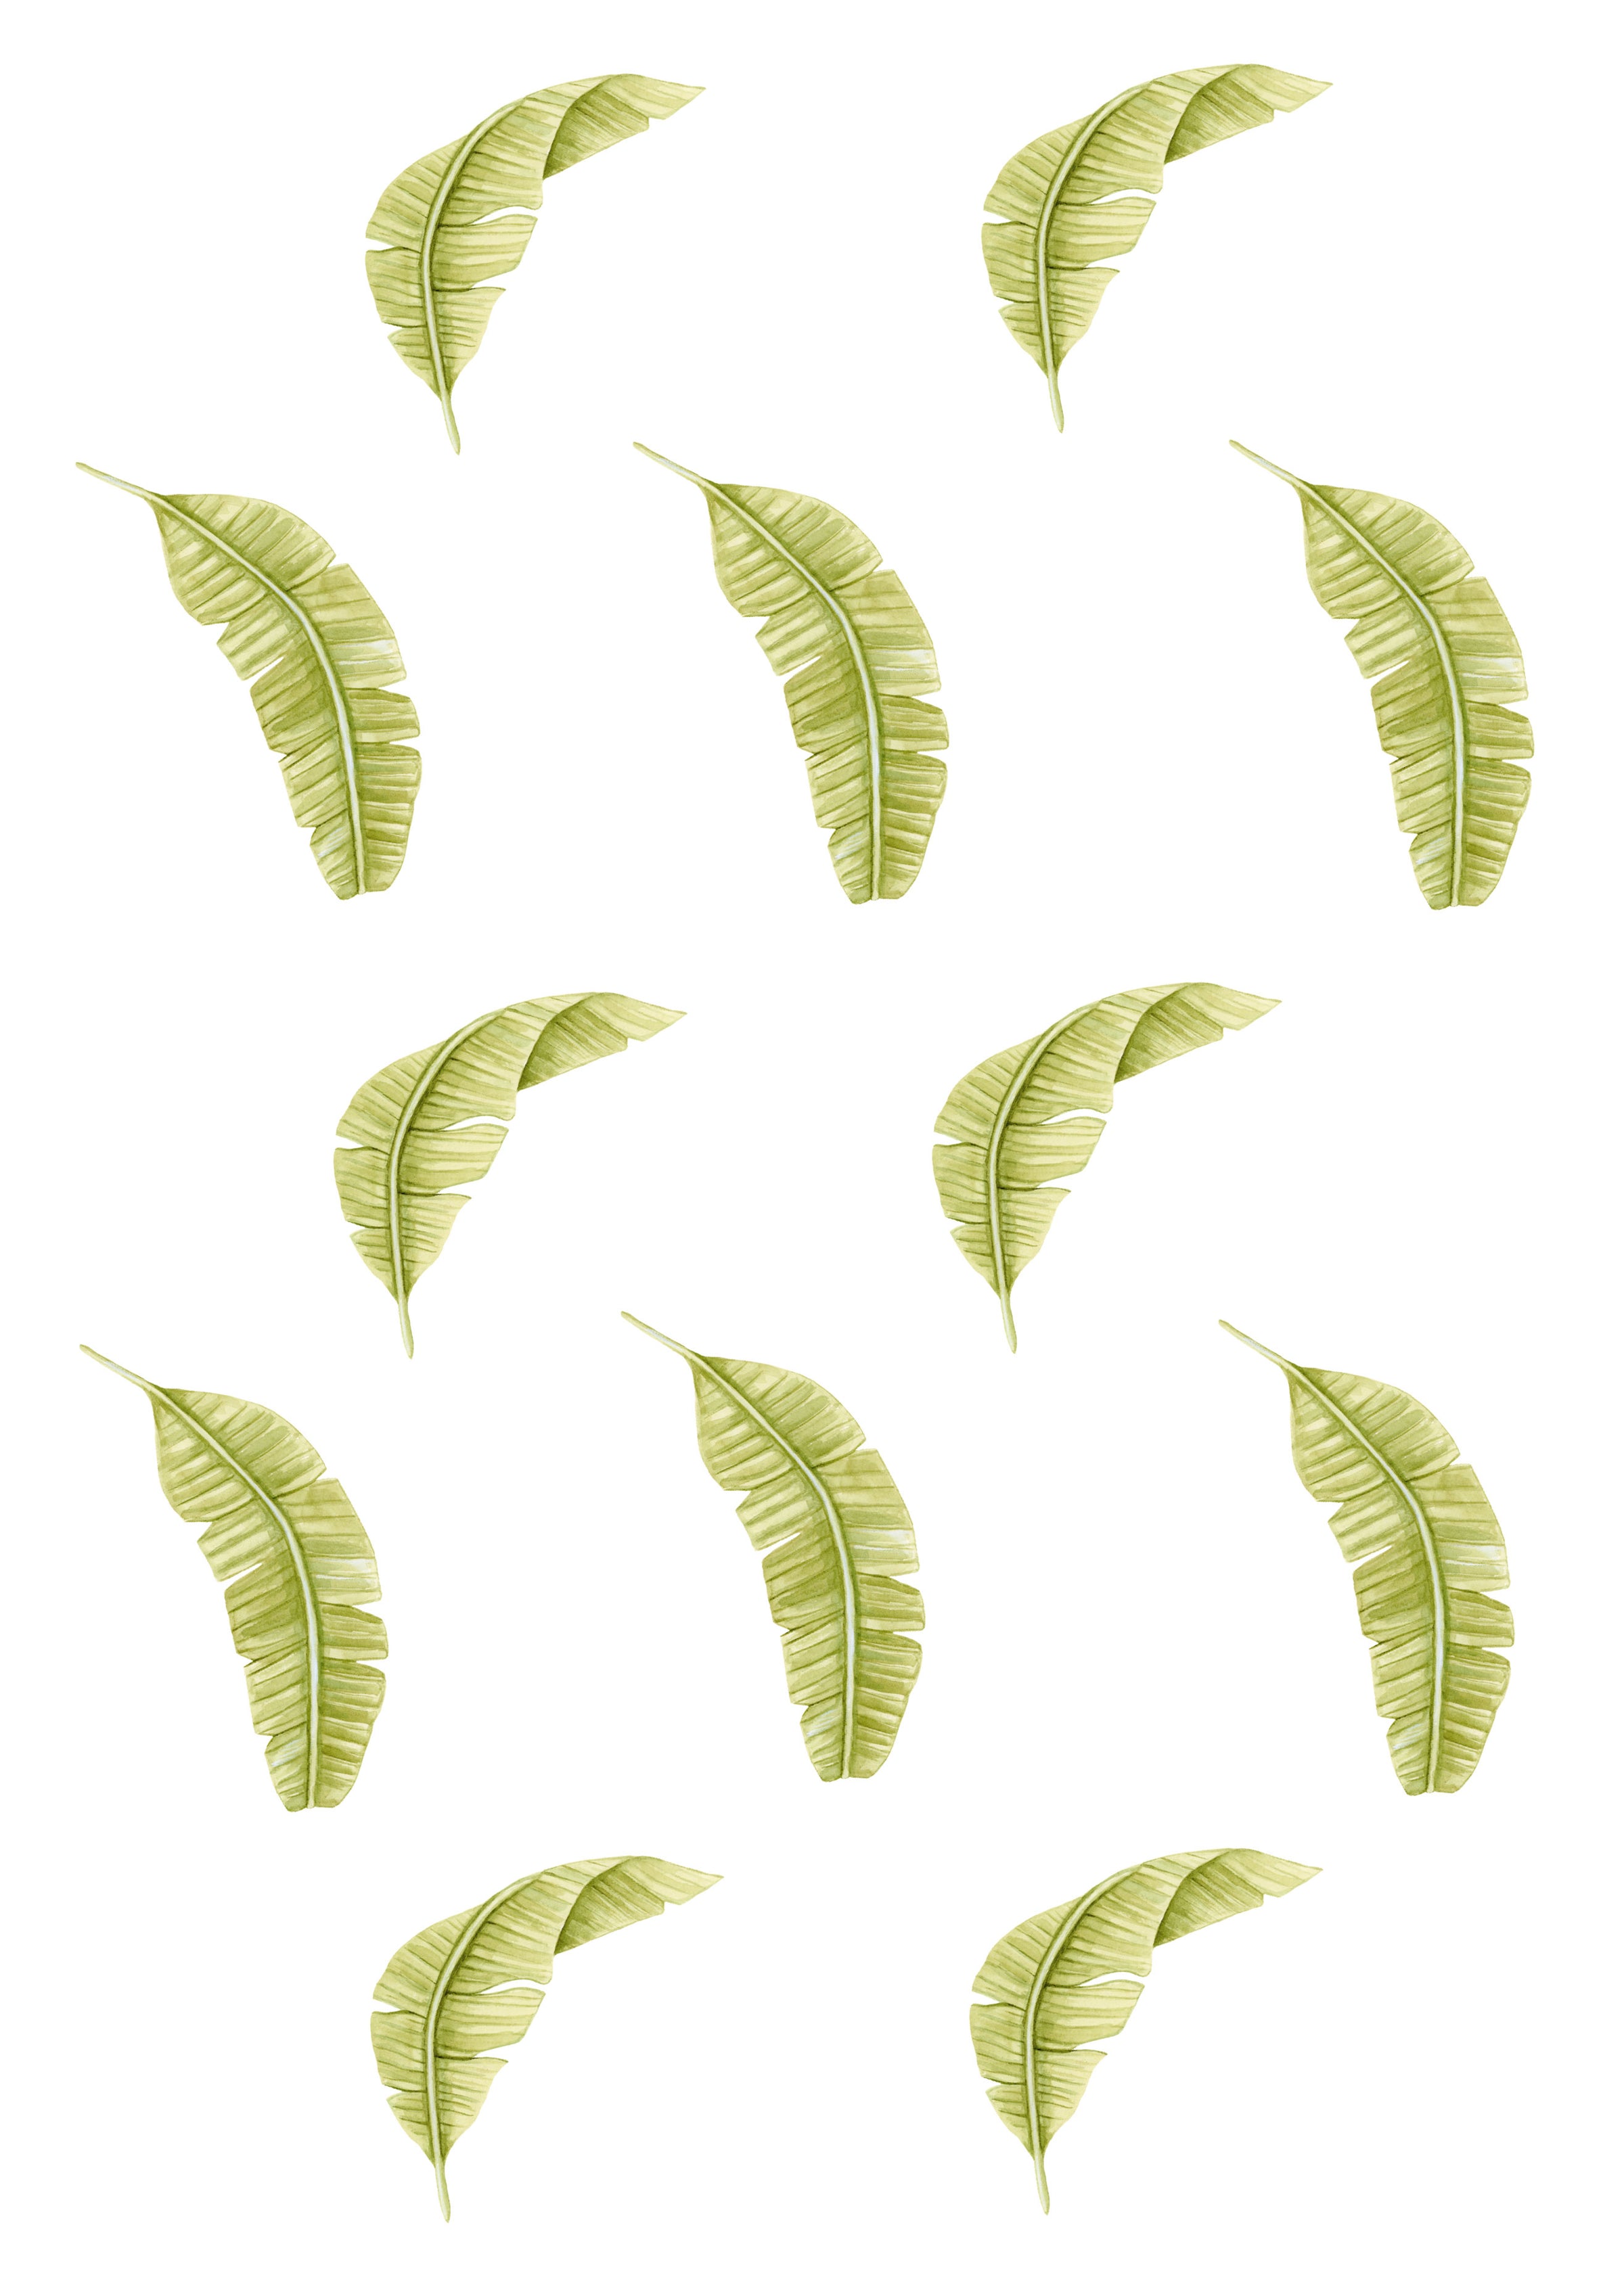 Jungle Leaves - Wall Stickers